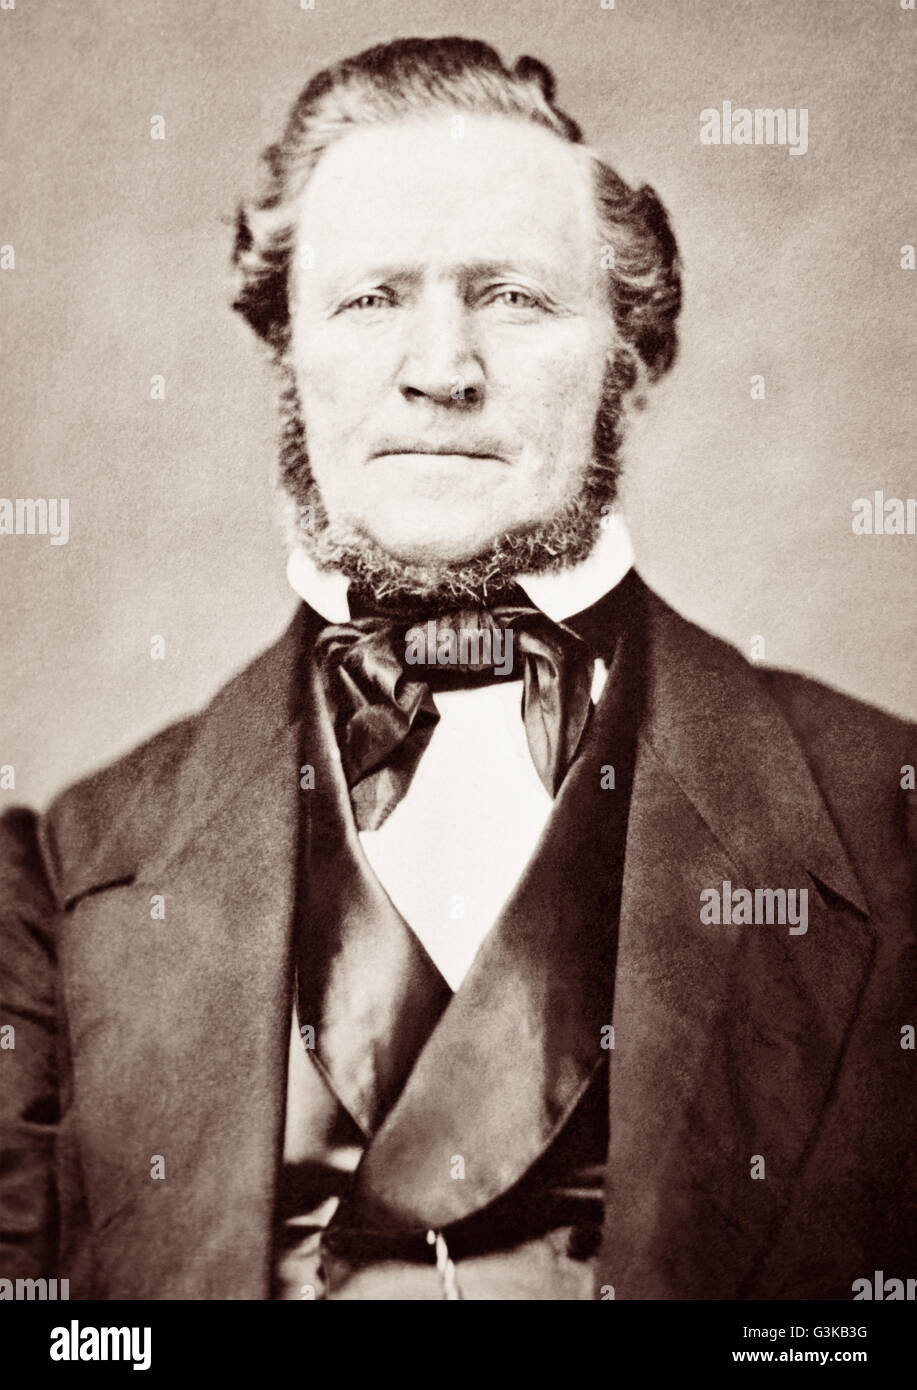 Brigham Young (1801-1877) was an early and influential leader of the Mormon (The Church of Latter-day Saints, or LDS) movement, a pioneer and a polygamist who founded Salt Lake City and served as the first Governor of the Utah Territory. Portrait photo by Matthew Brady (between 1855 and 1865). Stock Photo